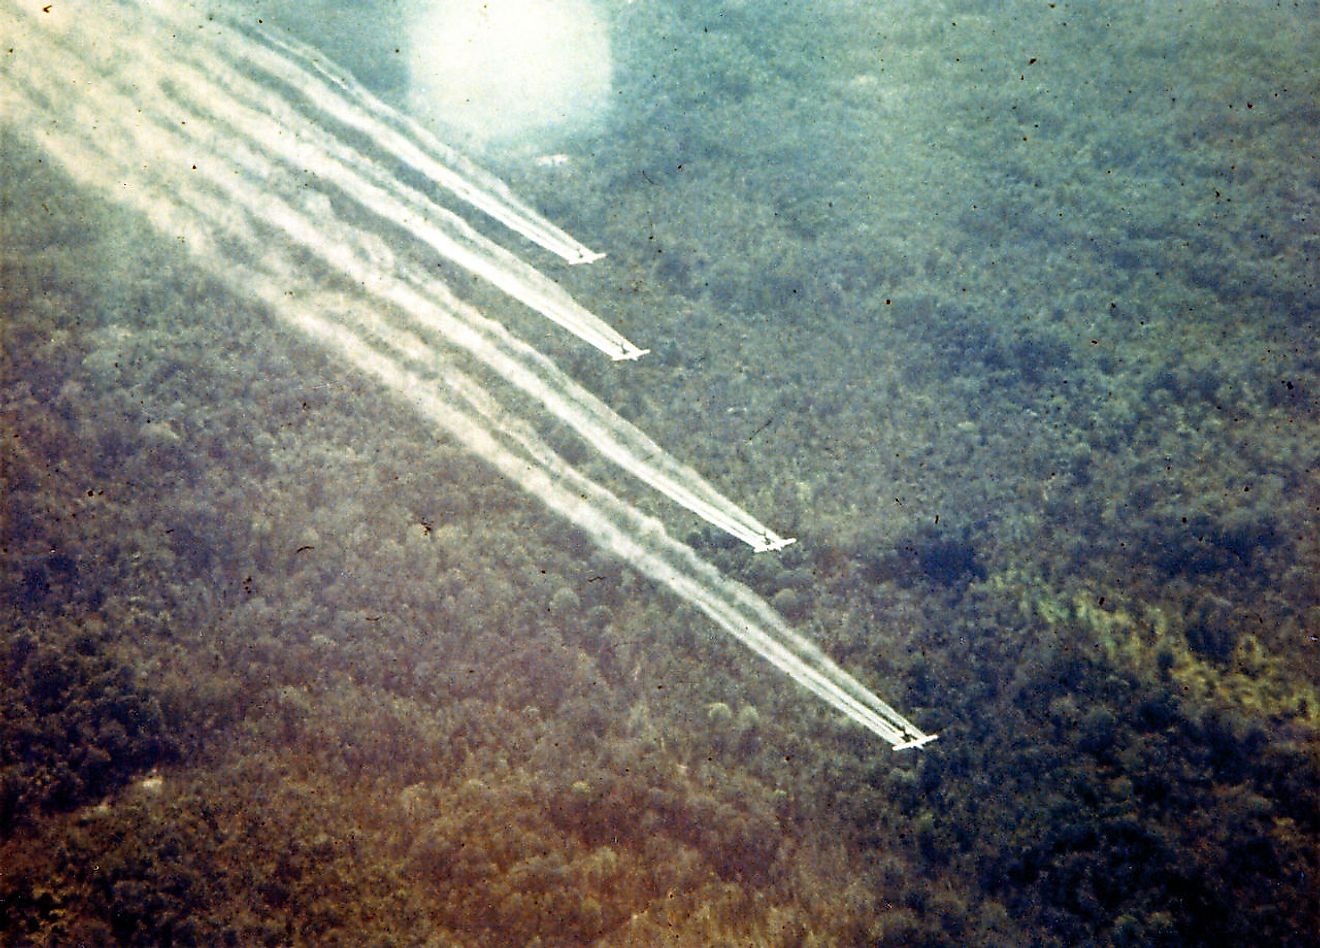 Defoliant spray run, part of Operation Ranch Hand, during the Vietnam War by UC-123B Provider aircraft. Image credit: USAF/Public domain